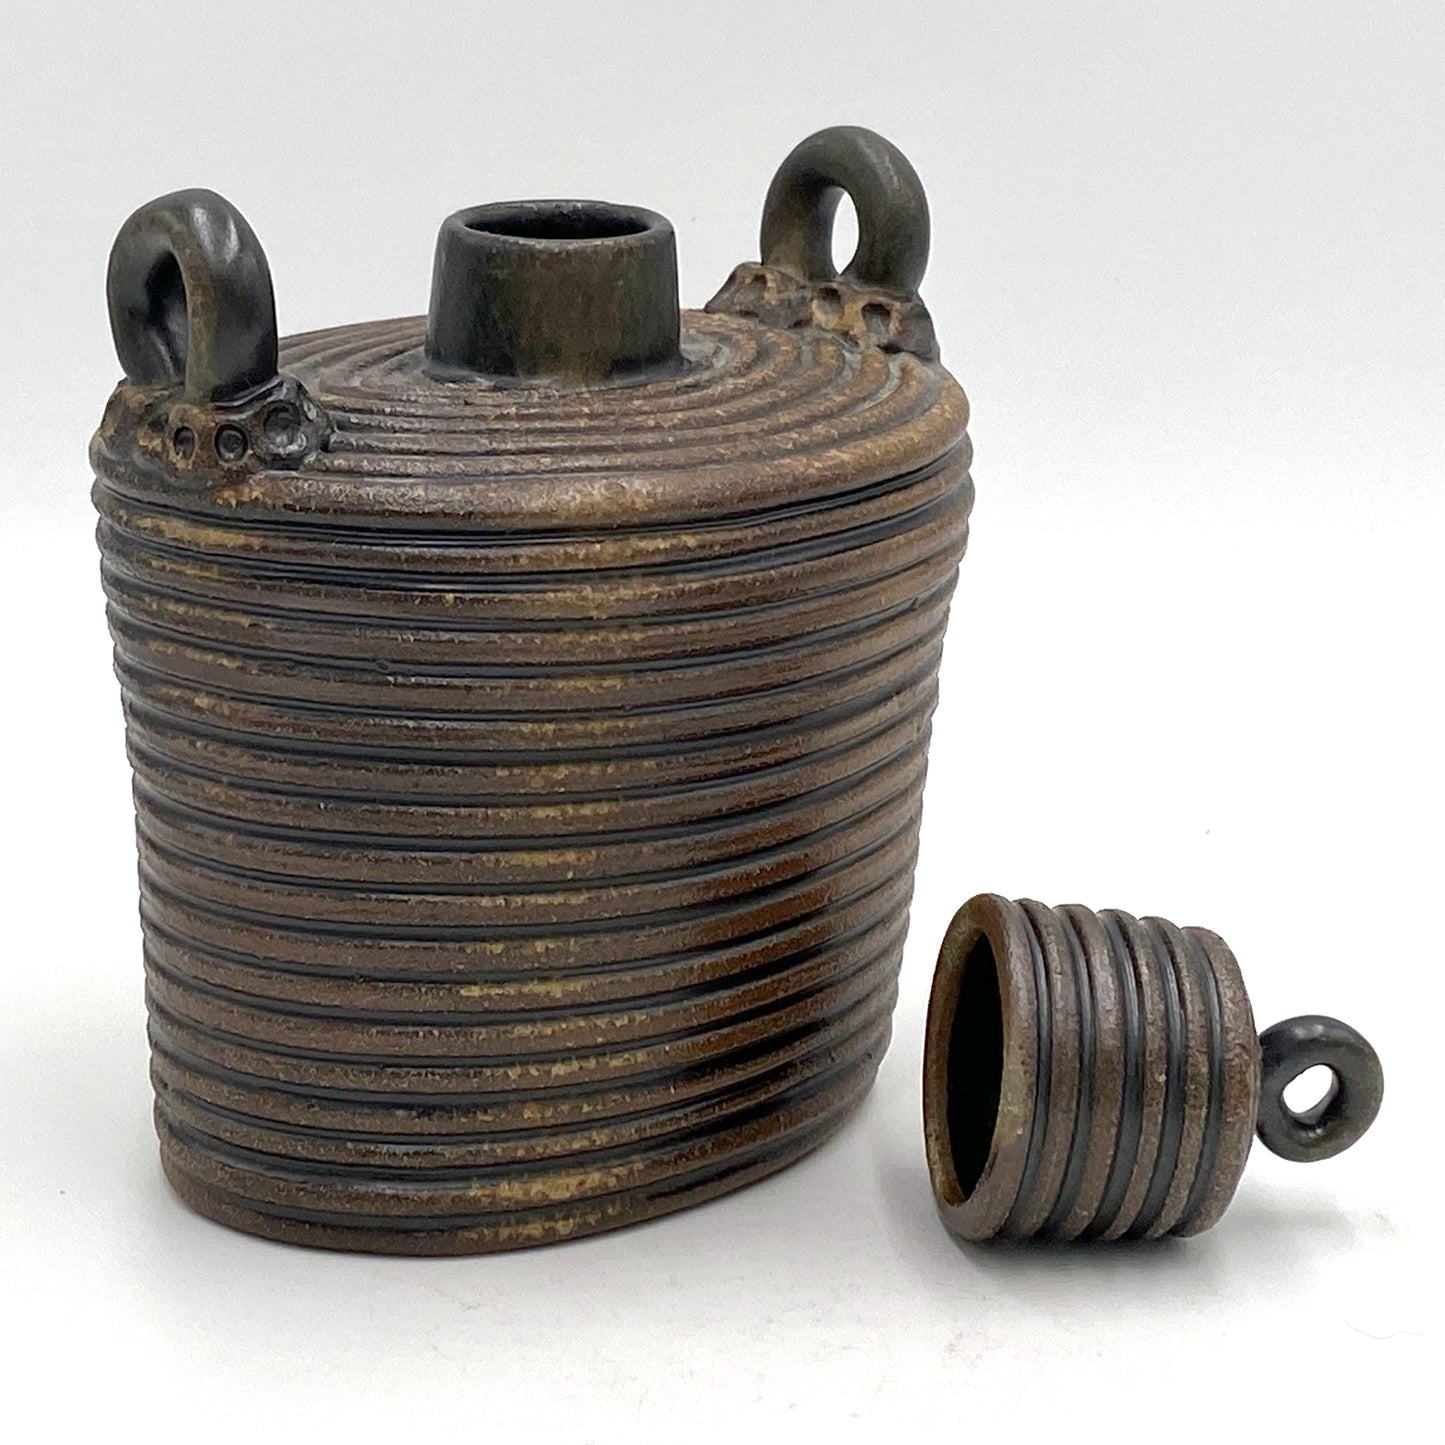 Large Wood-fired "Fat" Flask